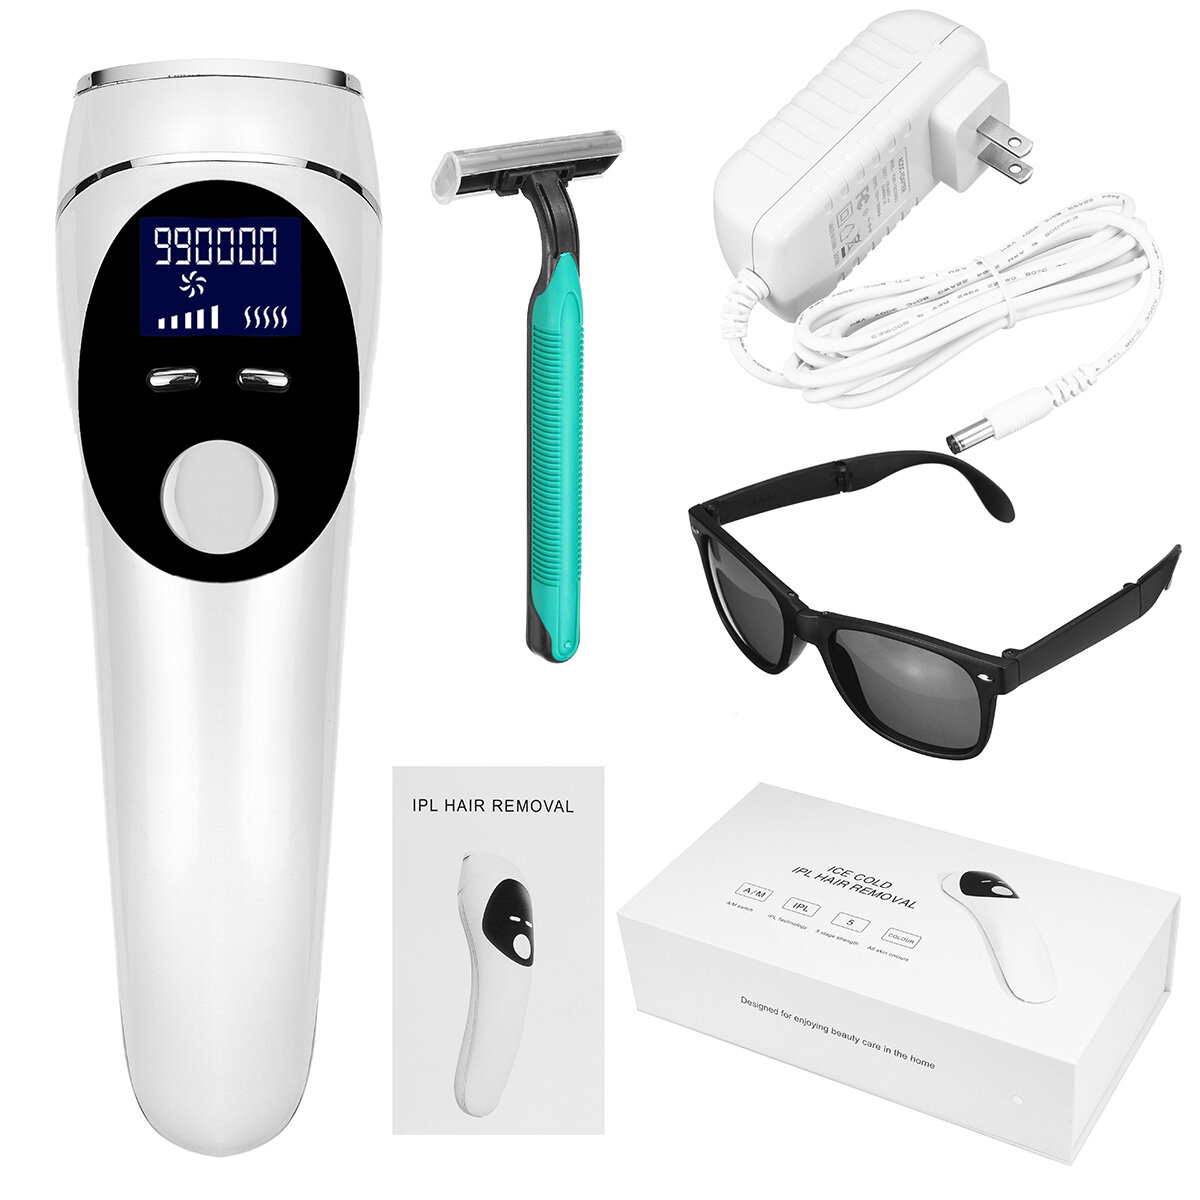 Image of 999999 Flashes DIY IPL Laser Hair Removal Device 5 Levels Painless Epilator Hair Remover